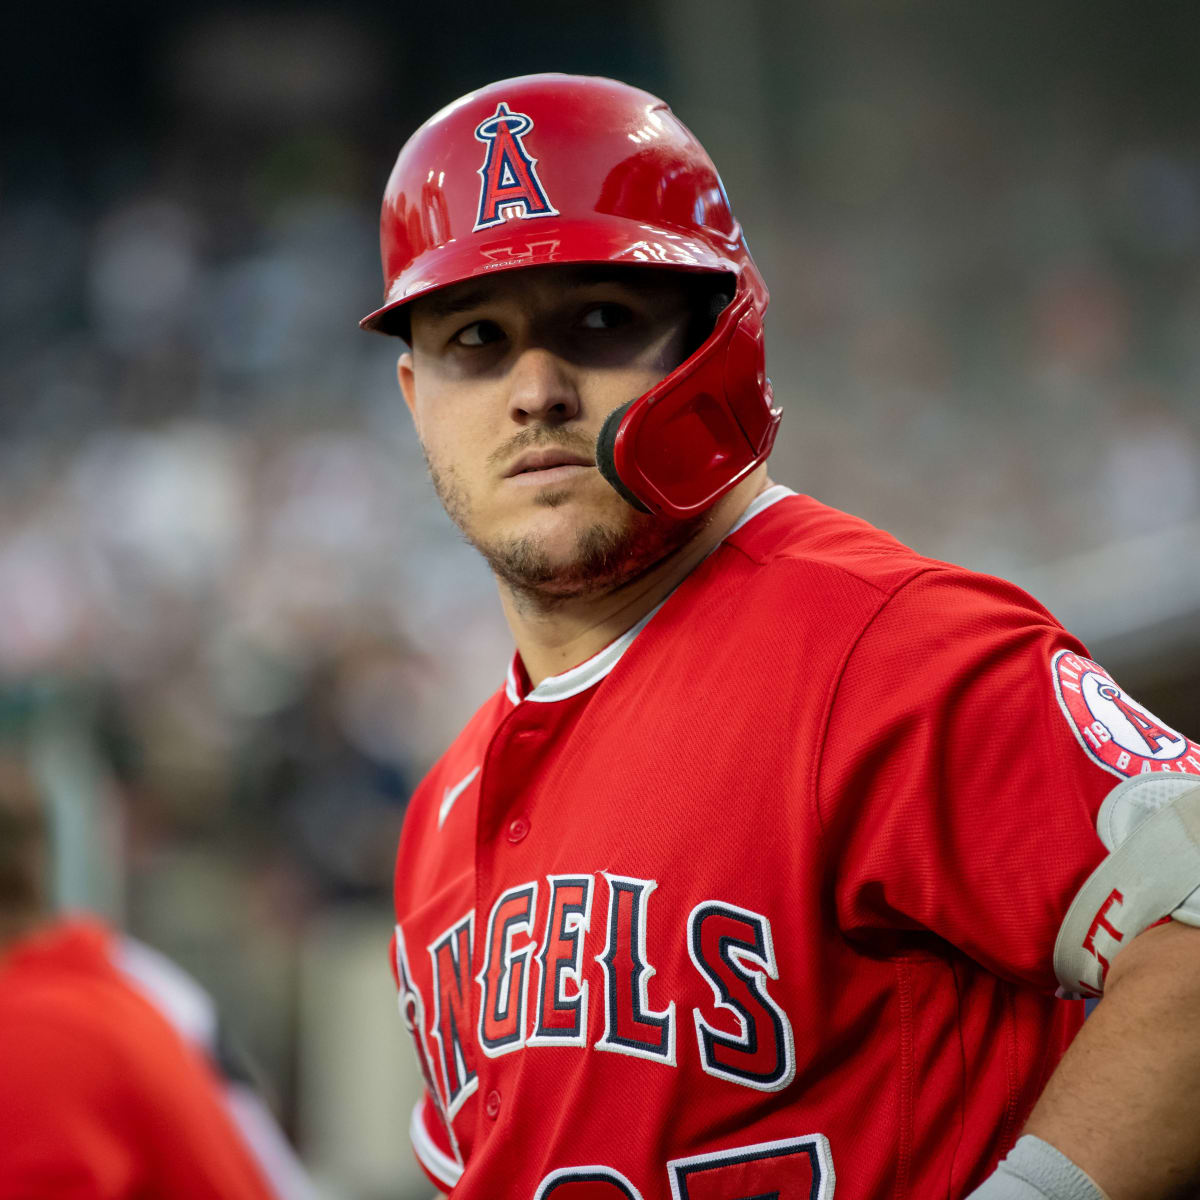 Is it a good idea for the Yankees to trade for Mike Trout?